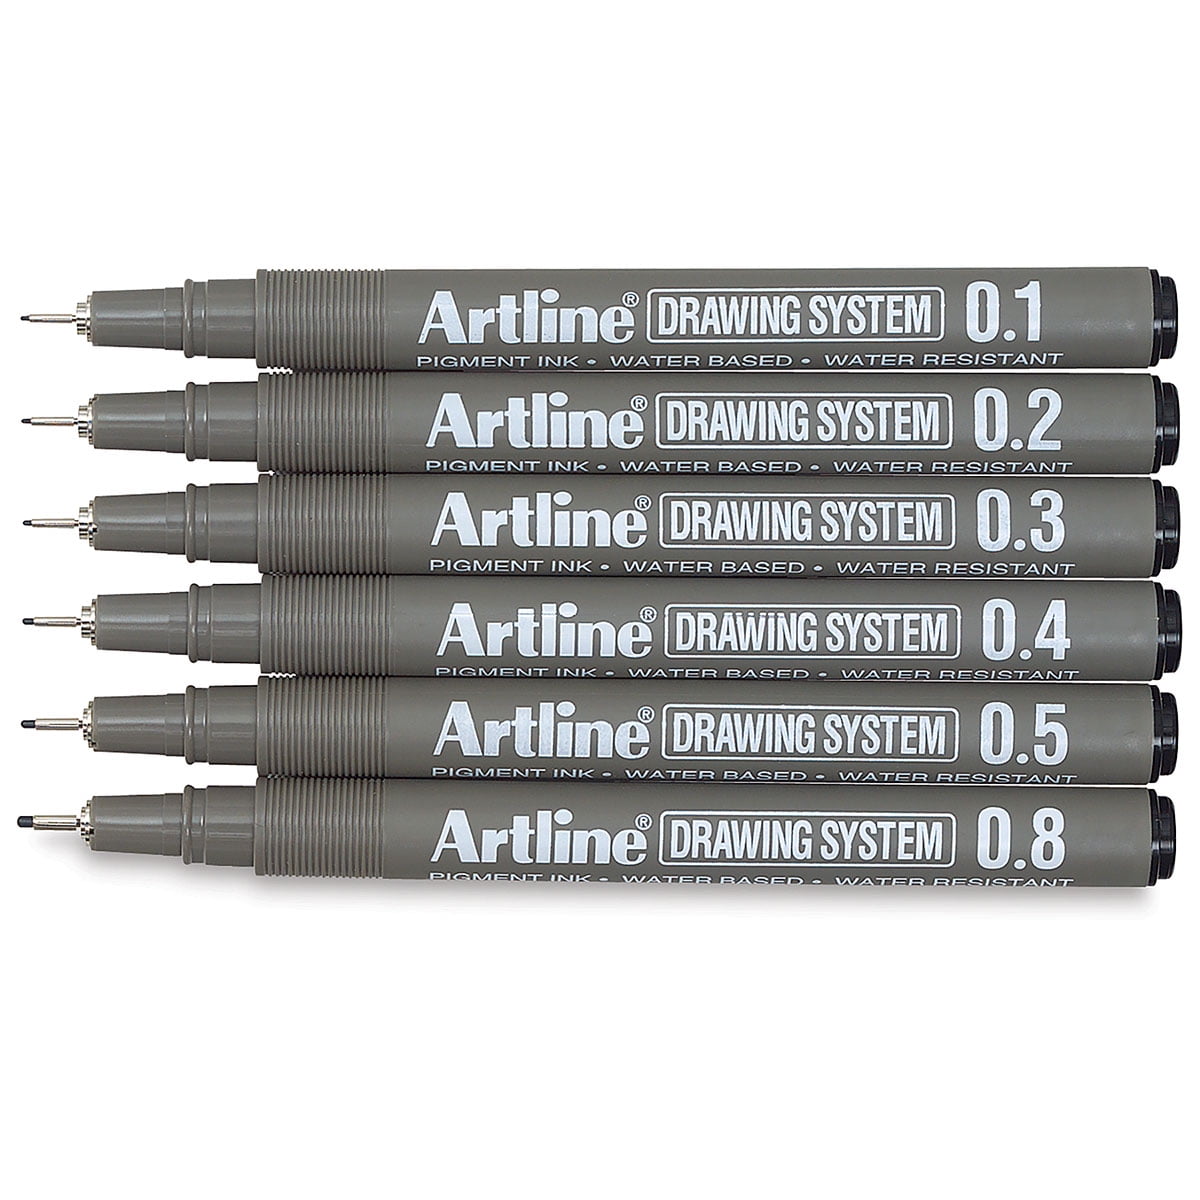  Artline Drawing System Technical Pens - Set of  6-0.05/0.1/0.2/0.3/0.5/0.8 (Black) Pegment Ink, Water Based, Water  Resistant - FREE 3D Key Chain : Office Products